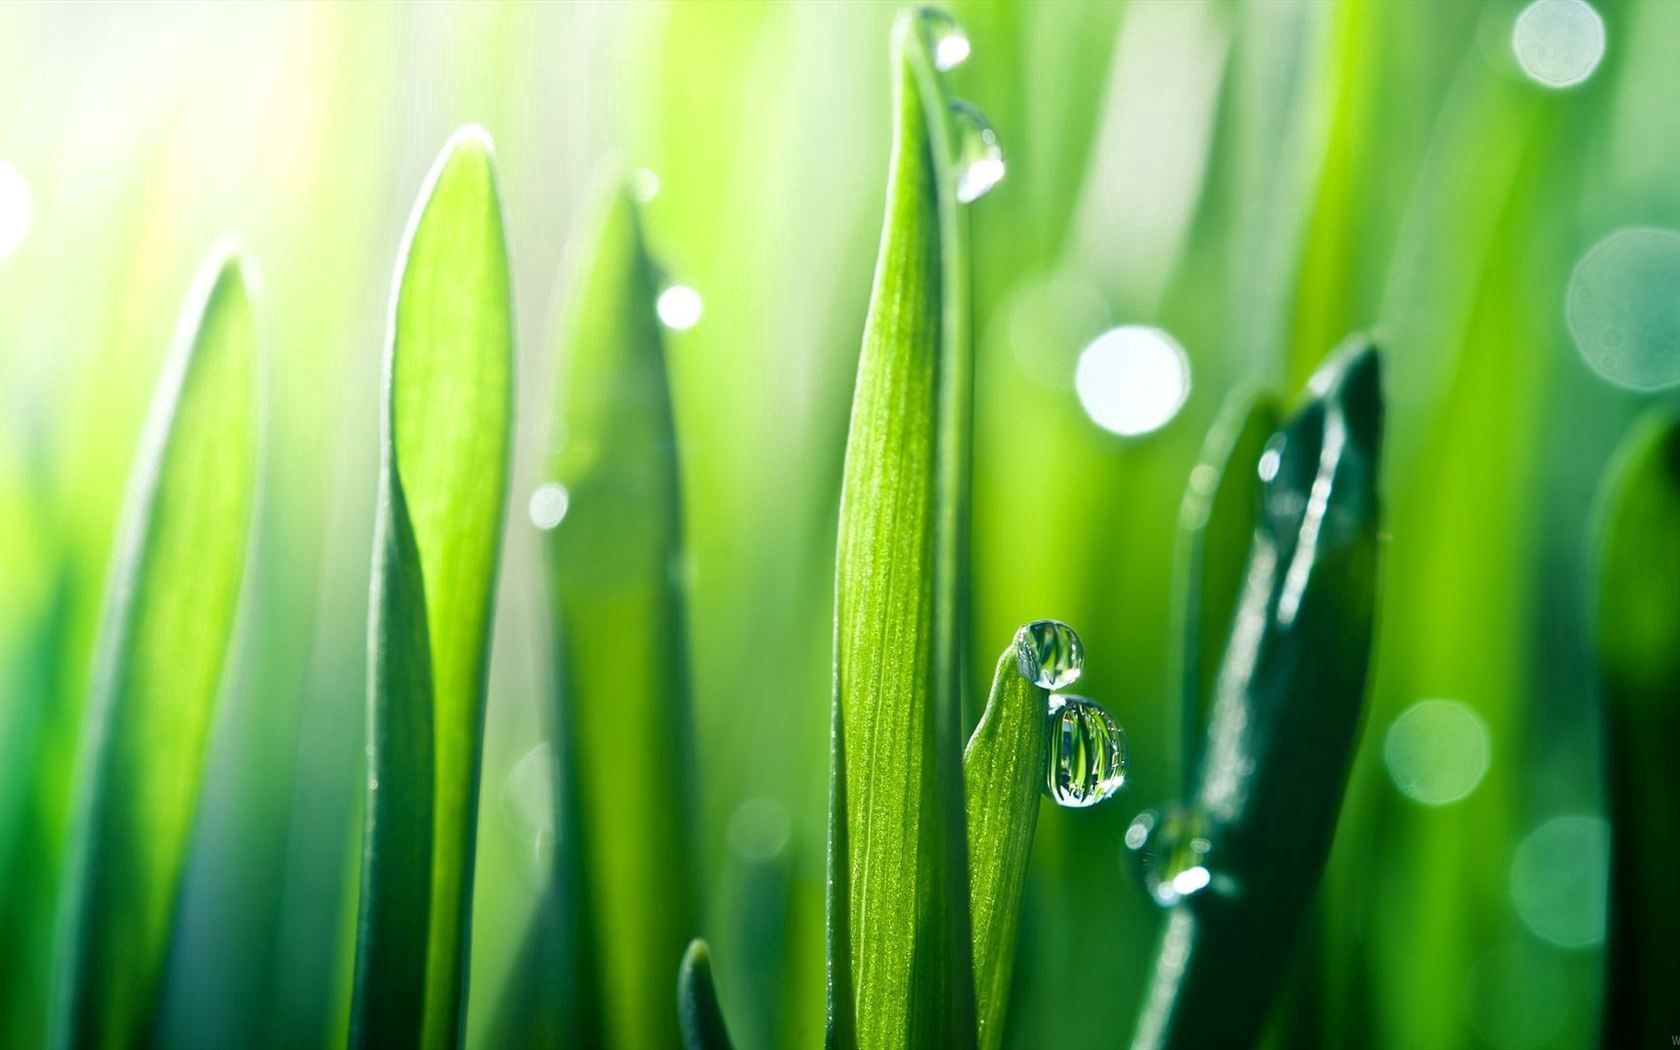 grass, smooth, blur, drops, macro, dew cell phone wallpapers